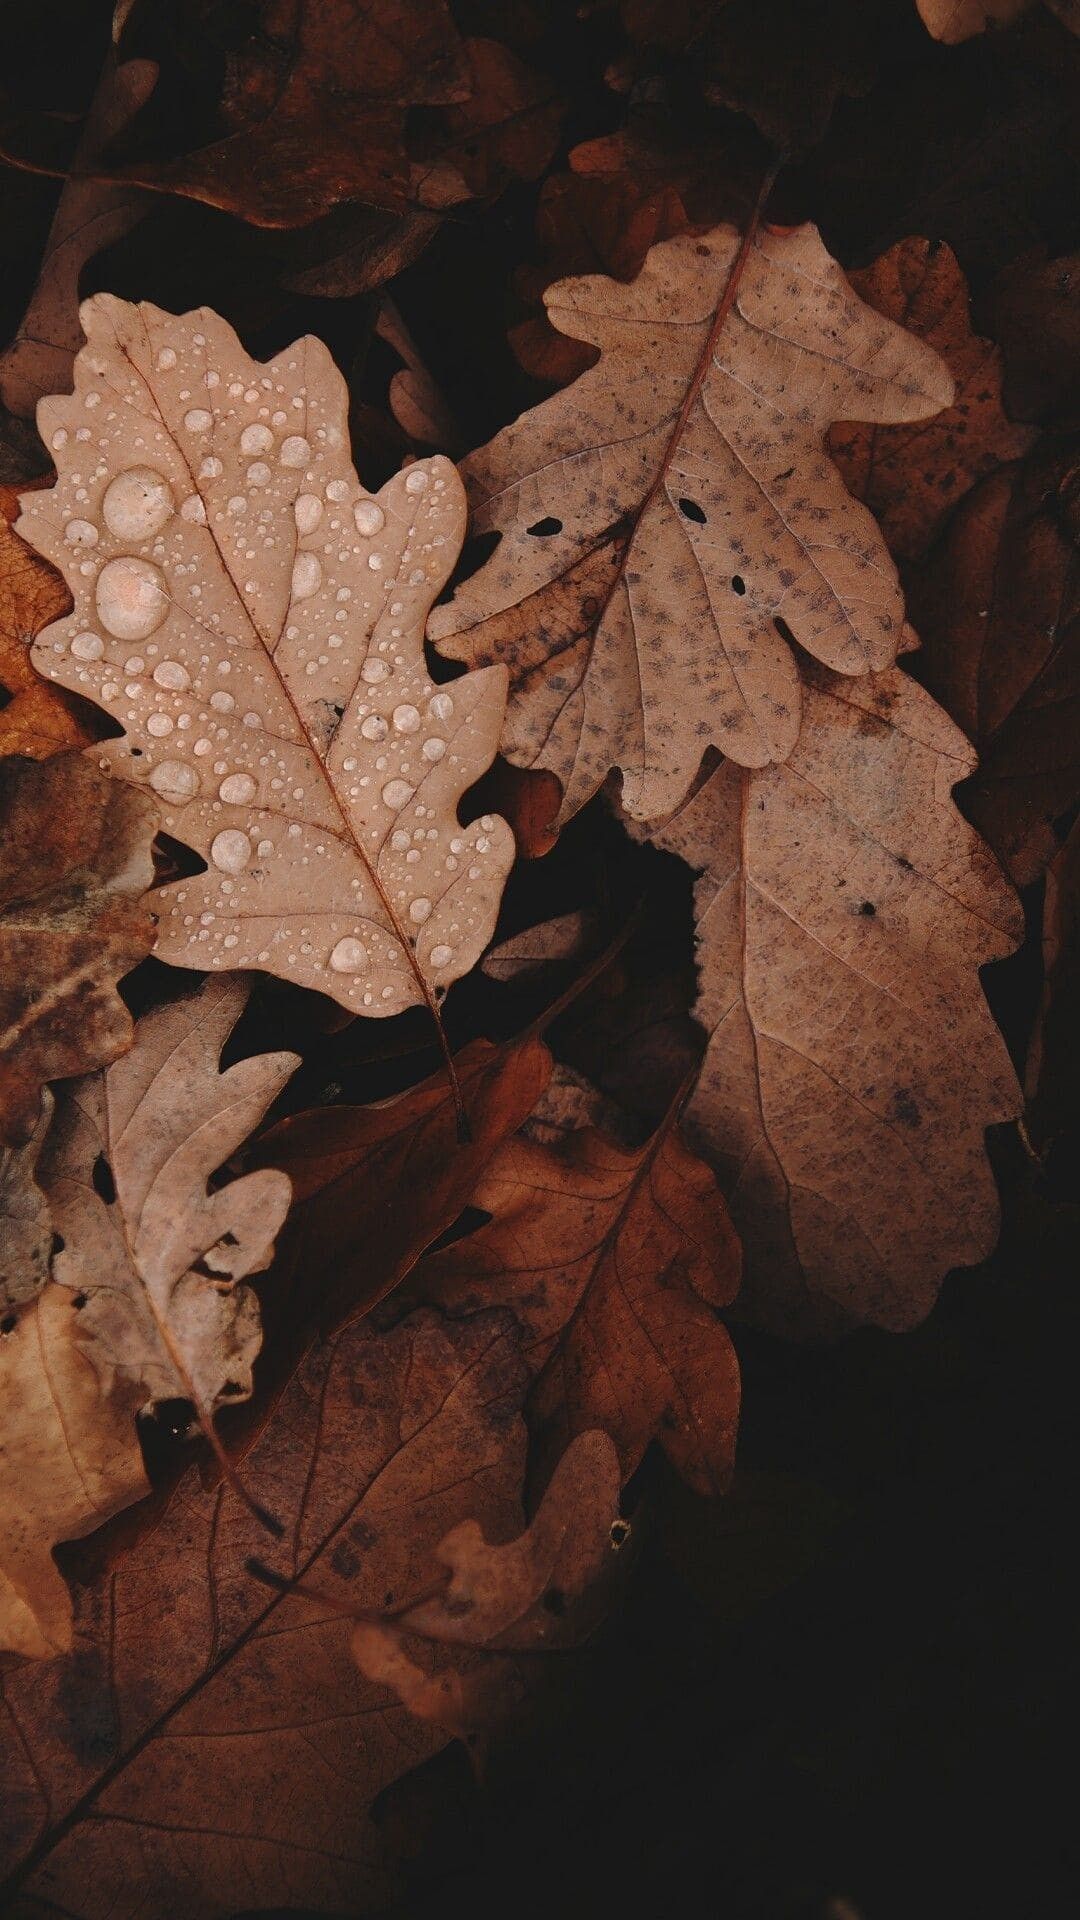 A close up of some leaves on the ground - Brown, vintage fall, light brown